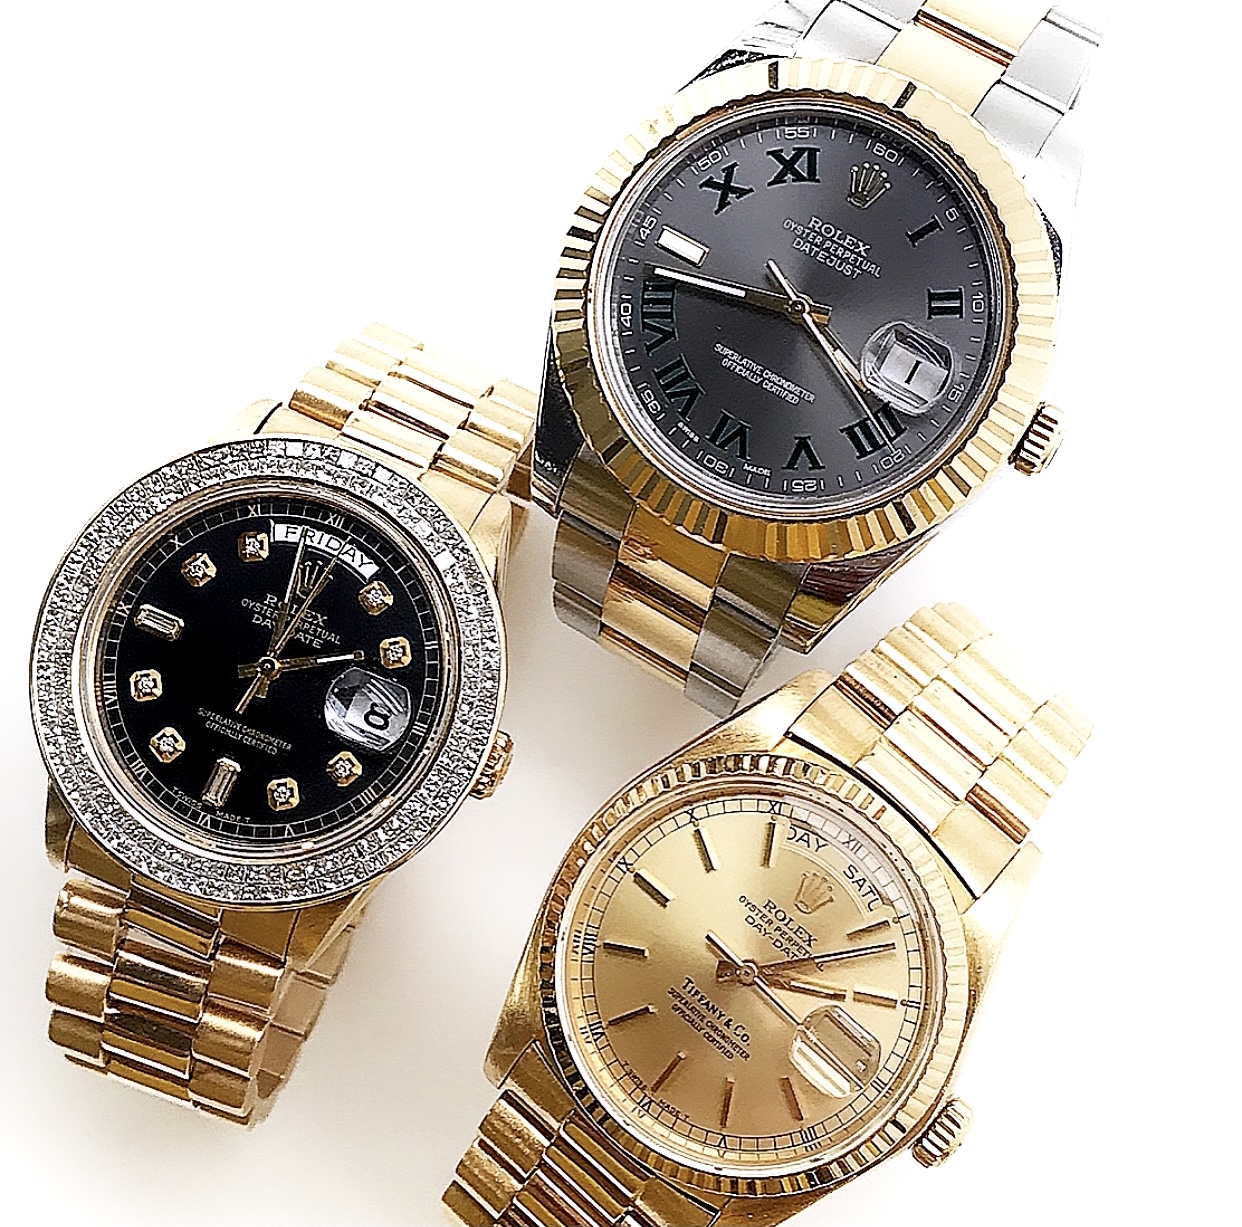 Professional and Expert watch buyers | Sell rolexes or any other, Our professional and experienced watch buyers are ready and available to get you the best prices for your used or new accessories, Arizona Chandler Gilbert Scottsdale Mesa Glendale Maricopa Tucson Casa Grande Payson Prescott Flagstaff Cave Creek Sun City AZ, rolex watch buyers and more | Murphy, Plano, Richardson, Sachse, Wylie, Allen, Garland, Parker, Lucas, St. Paul, Rowlett, Lavon, Nevada, Fairview, McKinney, Greenville, Royse City, Melissa, Prosper Texas